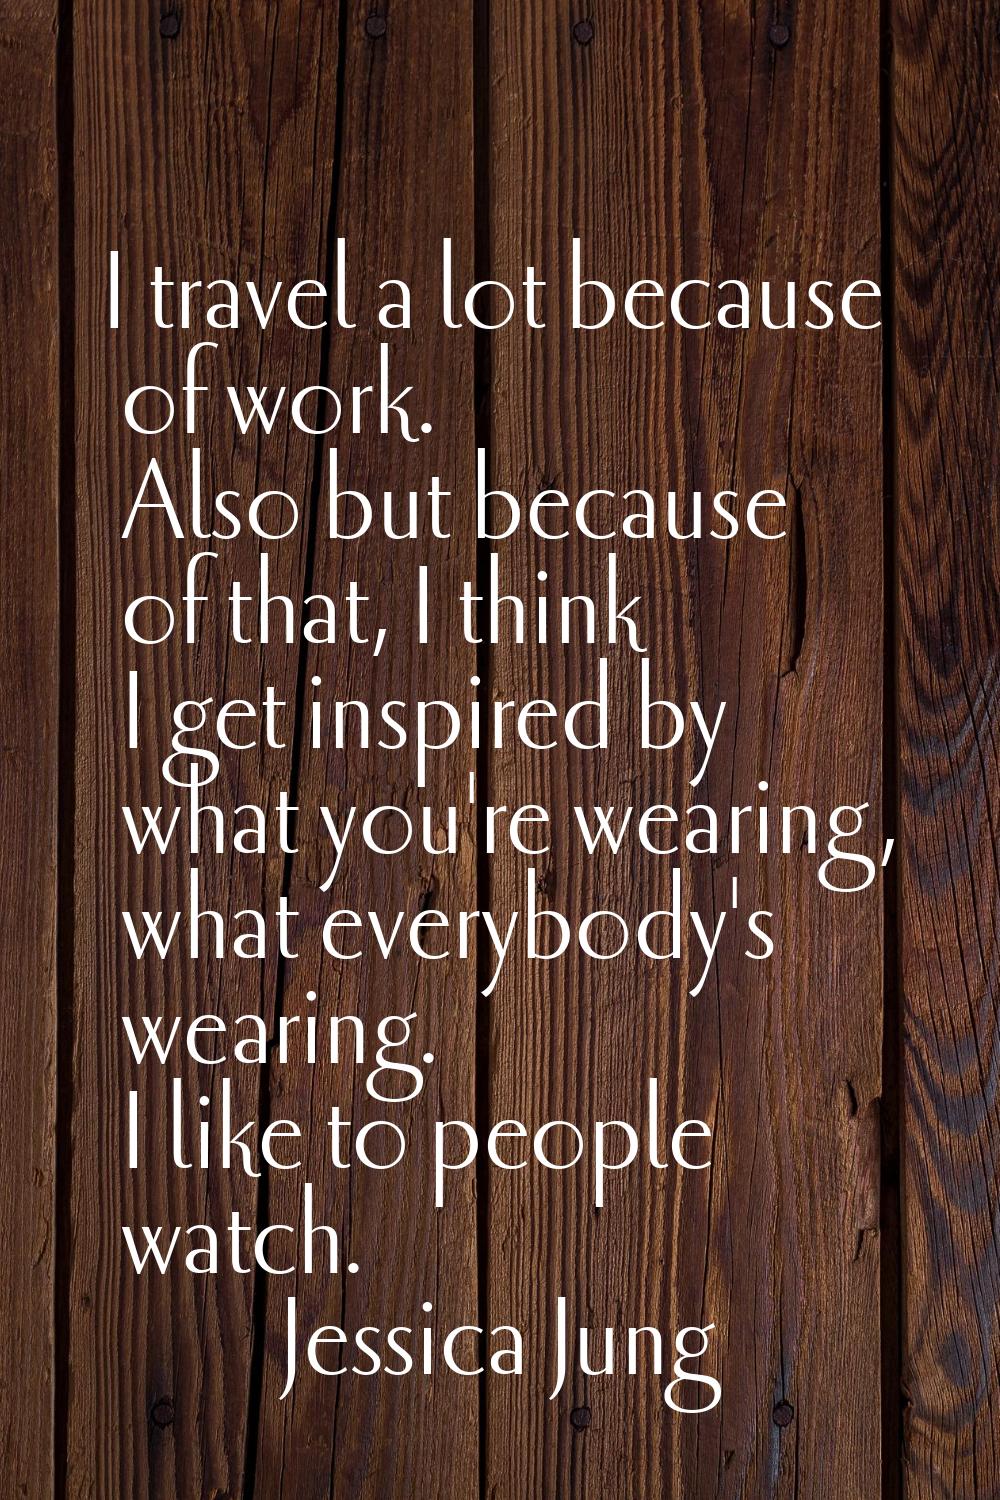 I travel a lot because of work. Also but because of that, I think I get inspired by what you're wea